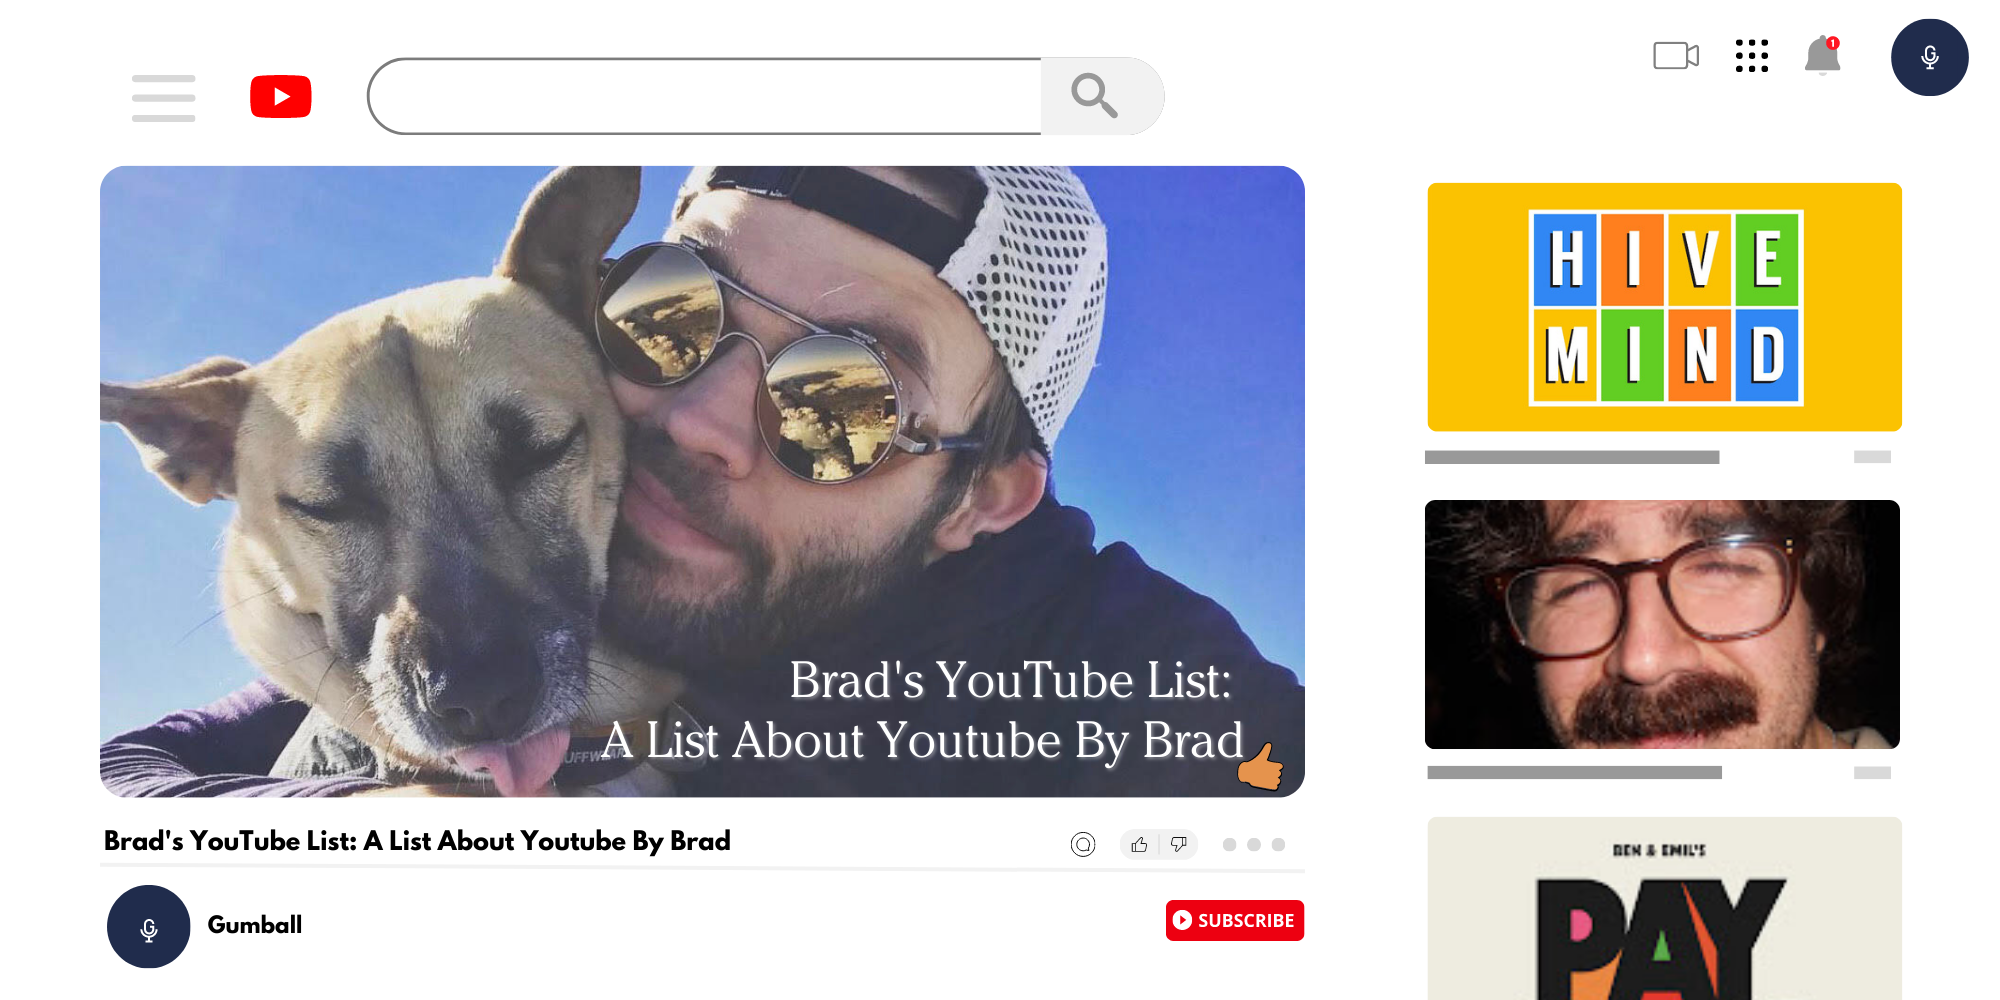 mockup of a simplified youtube interface with a photo of brad and his favorite channels as video thumbnails